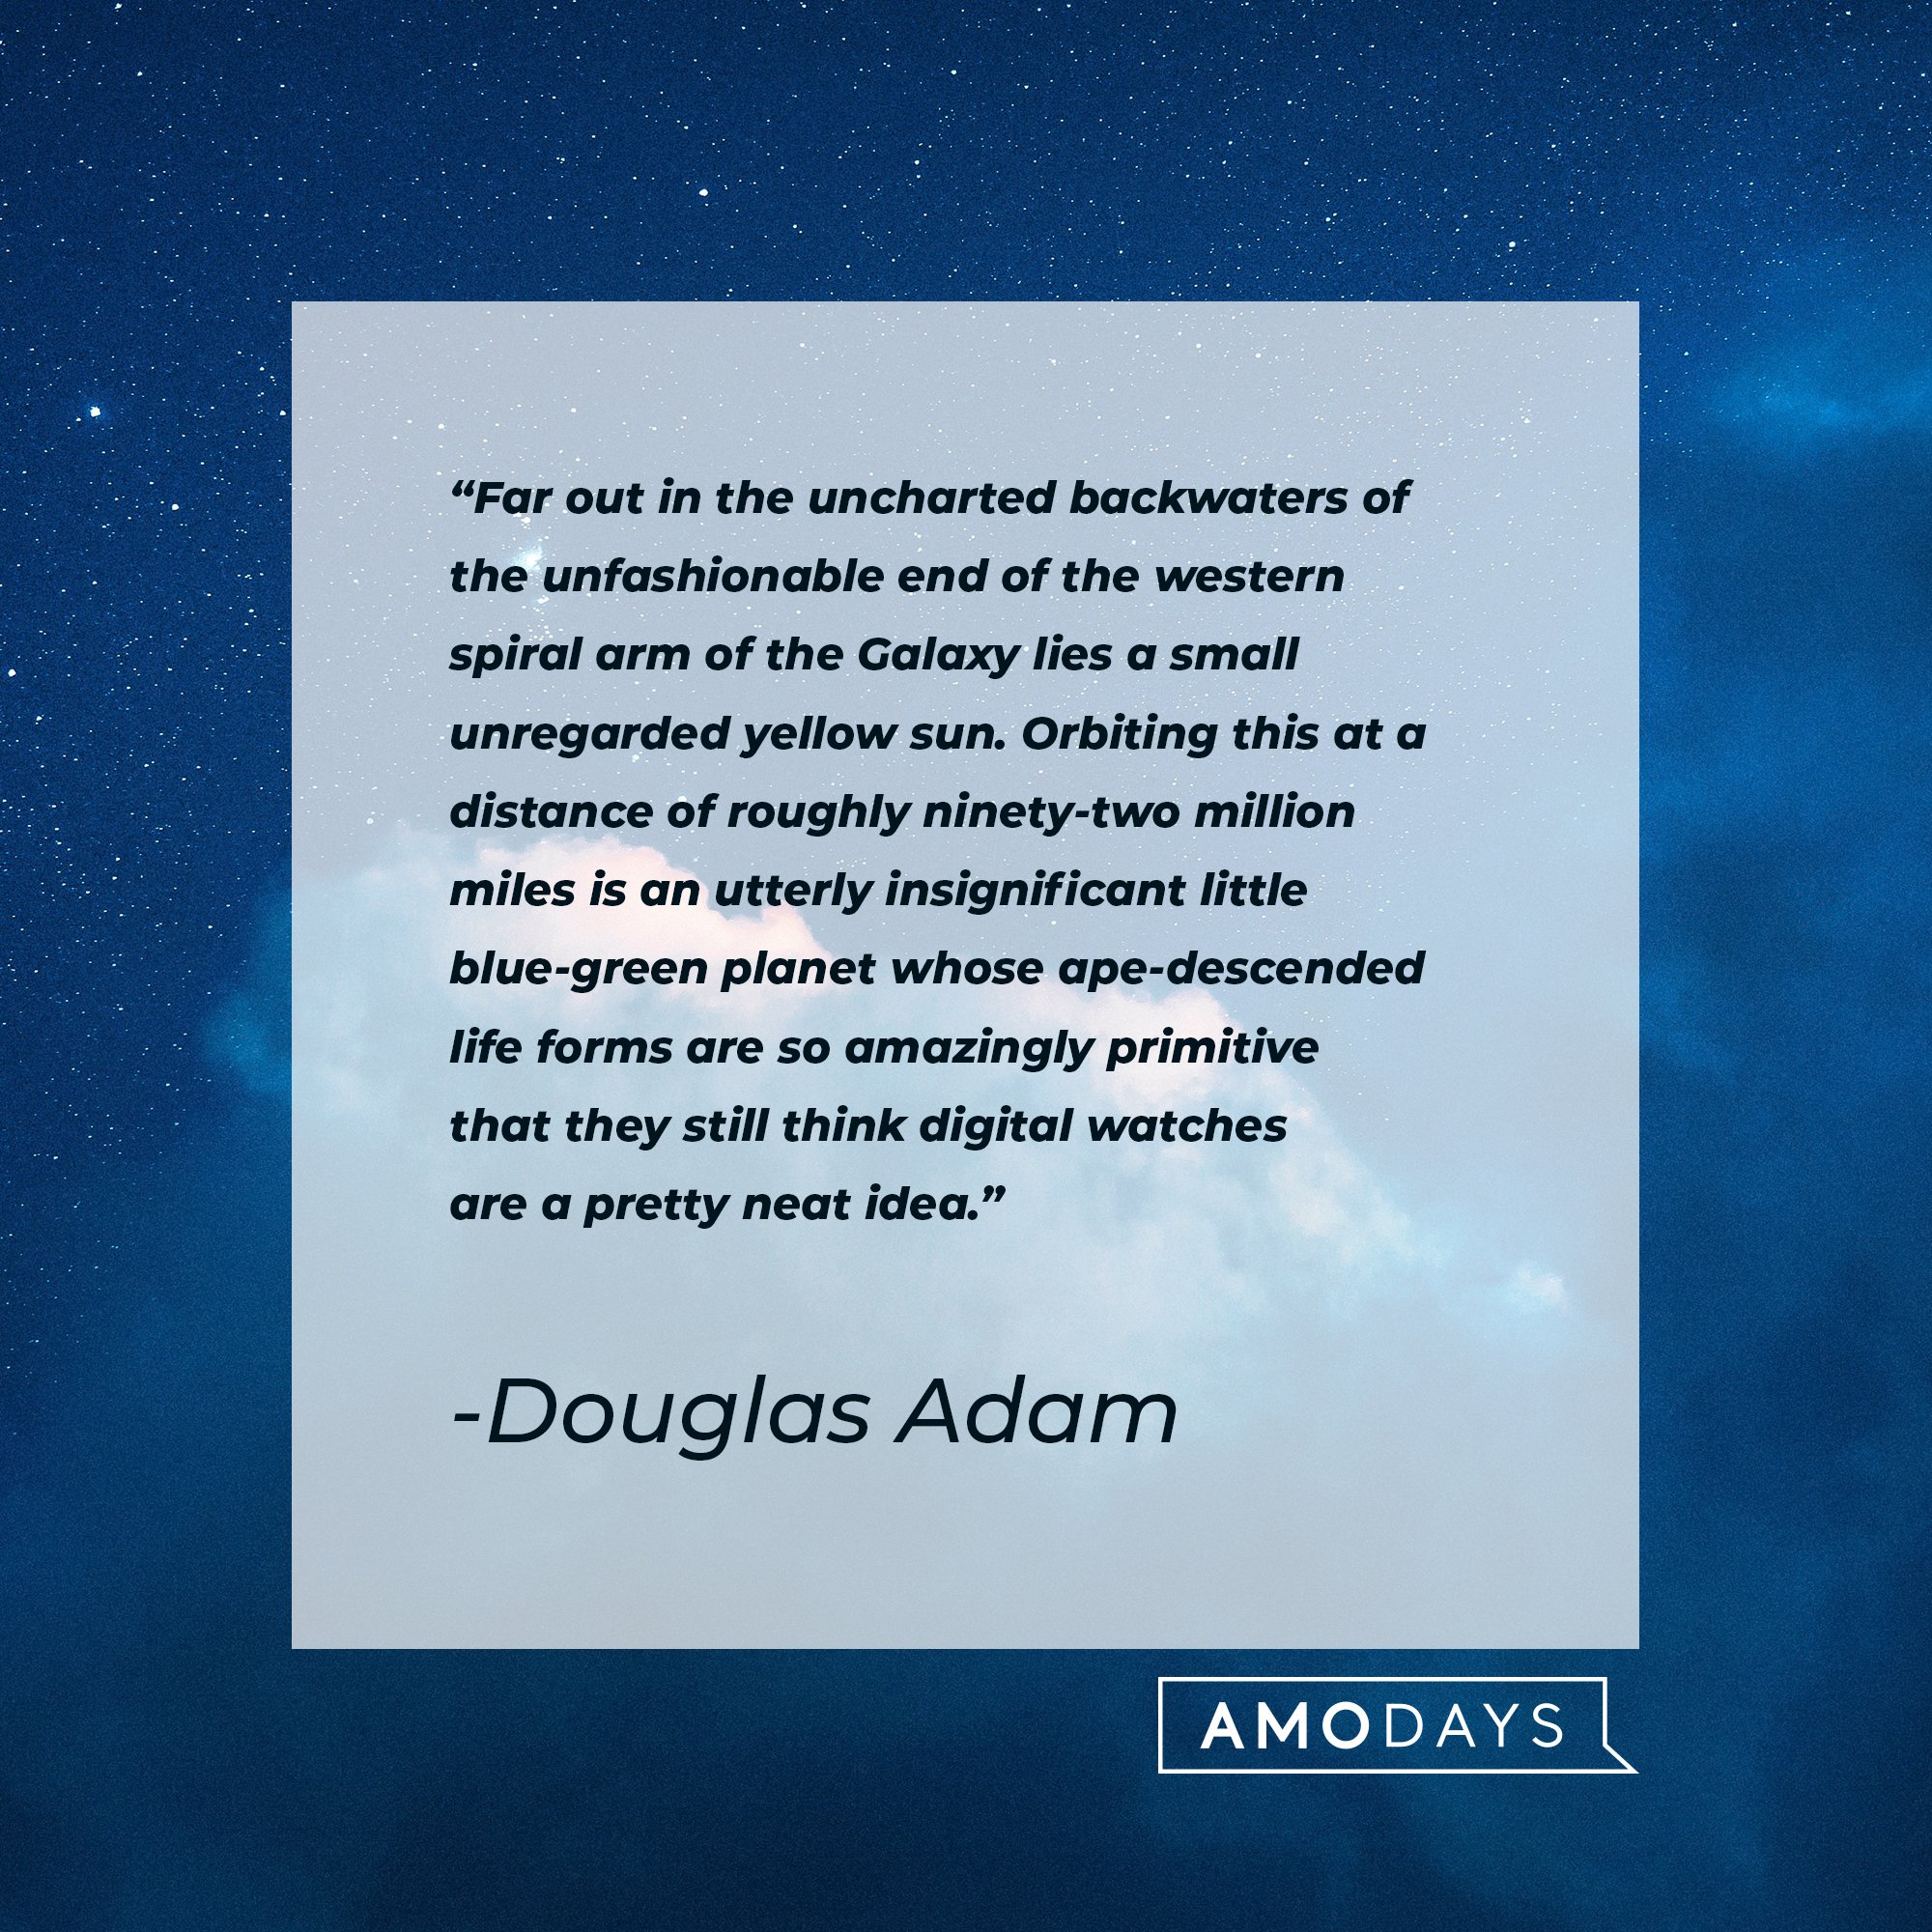 Douglas Adam’s quote:"Far out in the uncharted backwaters of the unfashionable end of the western spiral arm of the Galaxy lies a small unregarded yellow sun. Orbiting this at a distance of roughly ninety-two million miles is an utterly insignificant little blue-green planet whose ape-descended life forms are so amazingly primitive that they still think digital watches are a pretty neat idea." | Image: AmoDays